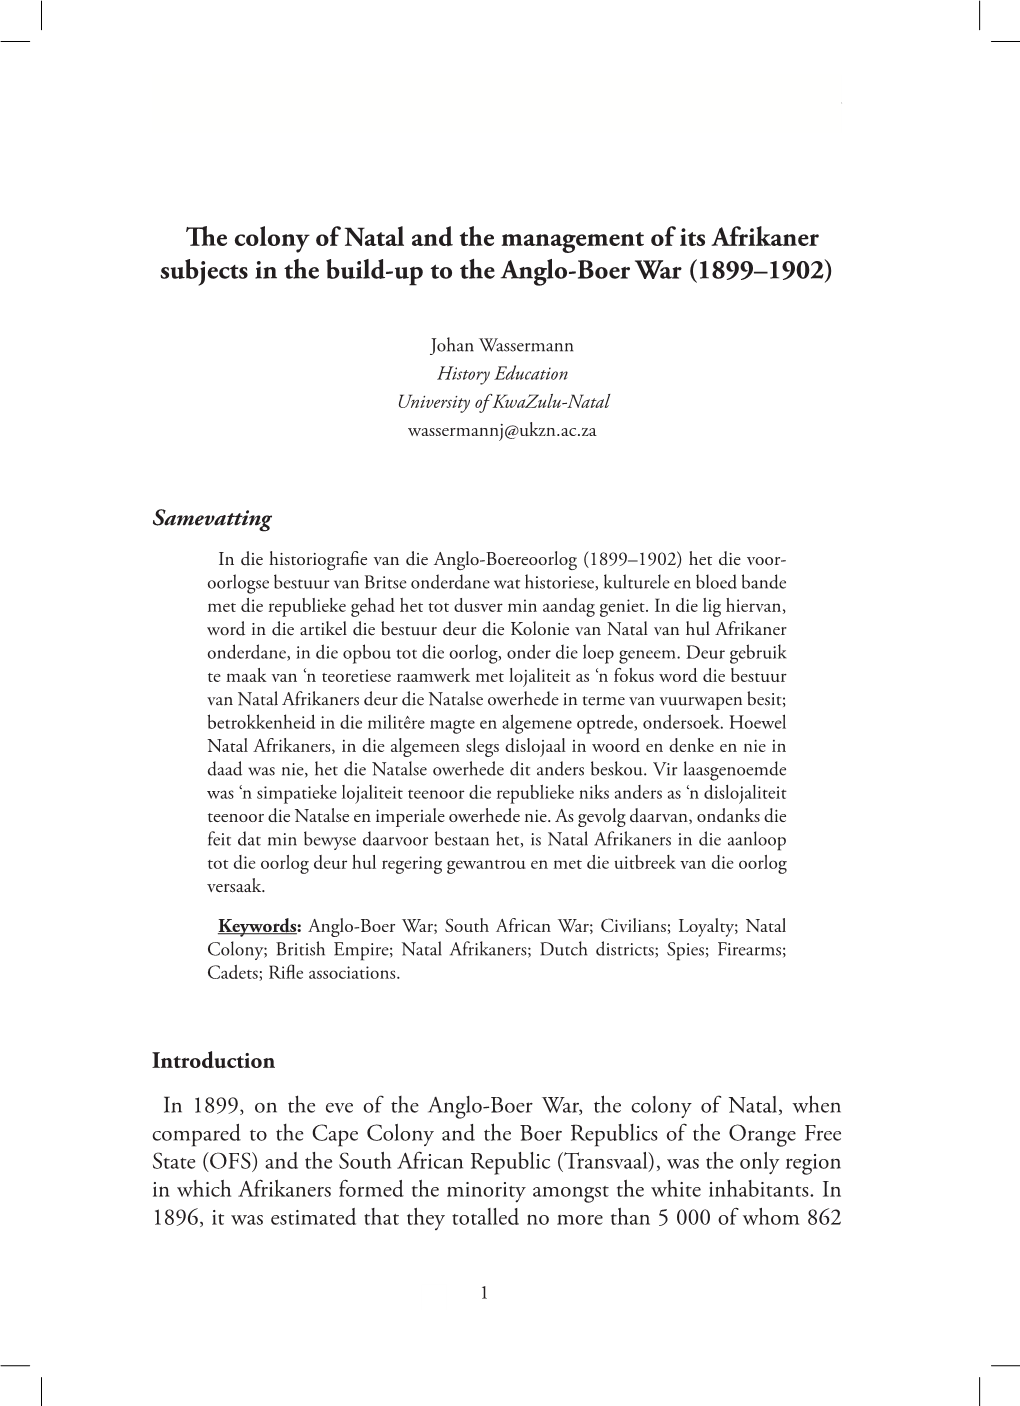 The Colony of Natal and the Management of Its Afrikaner Subjects in the Build-Up to the Anglo-Boer War (1899–1902)